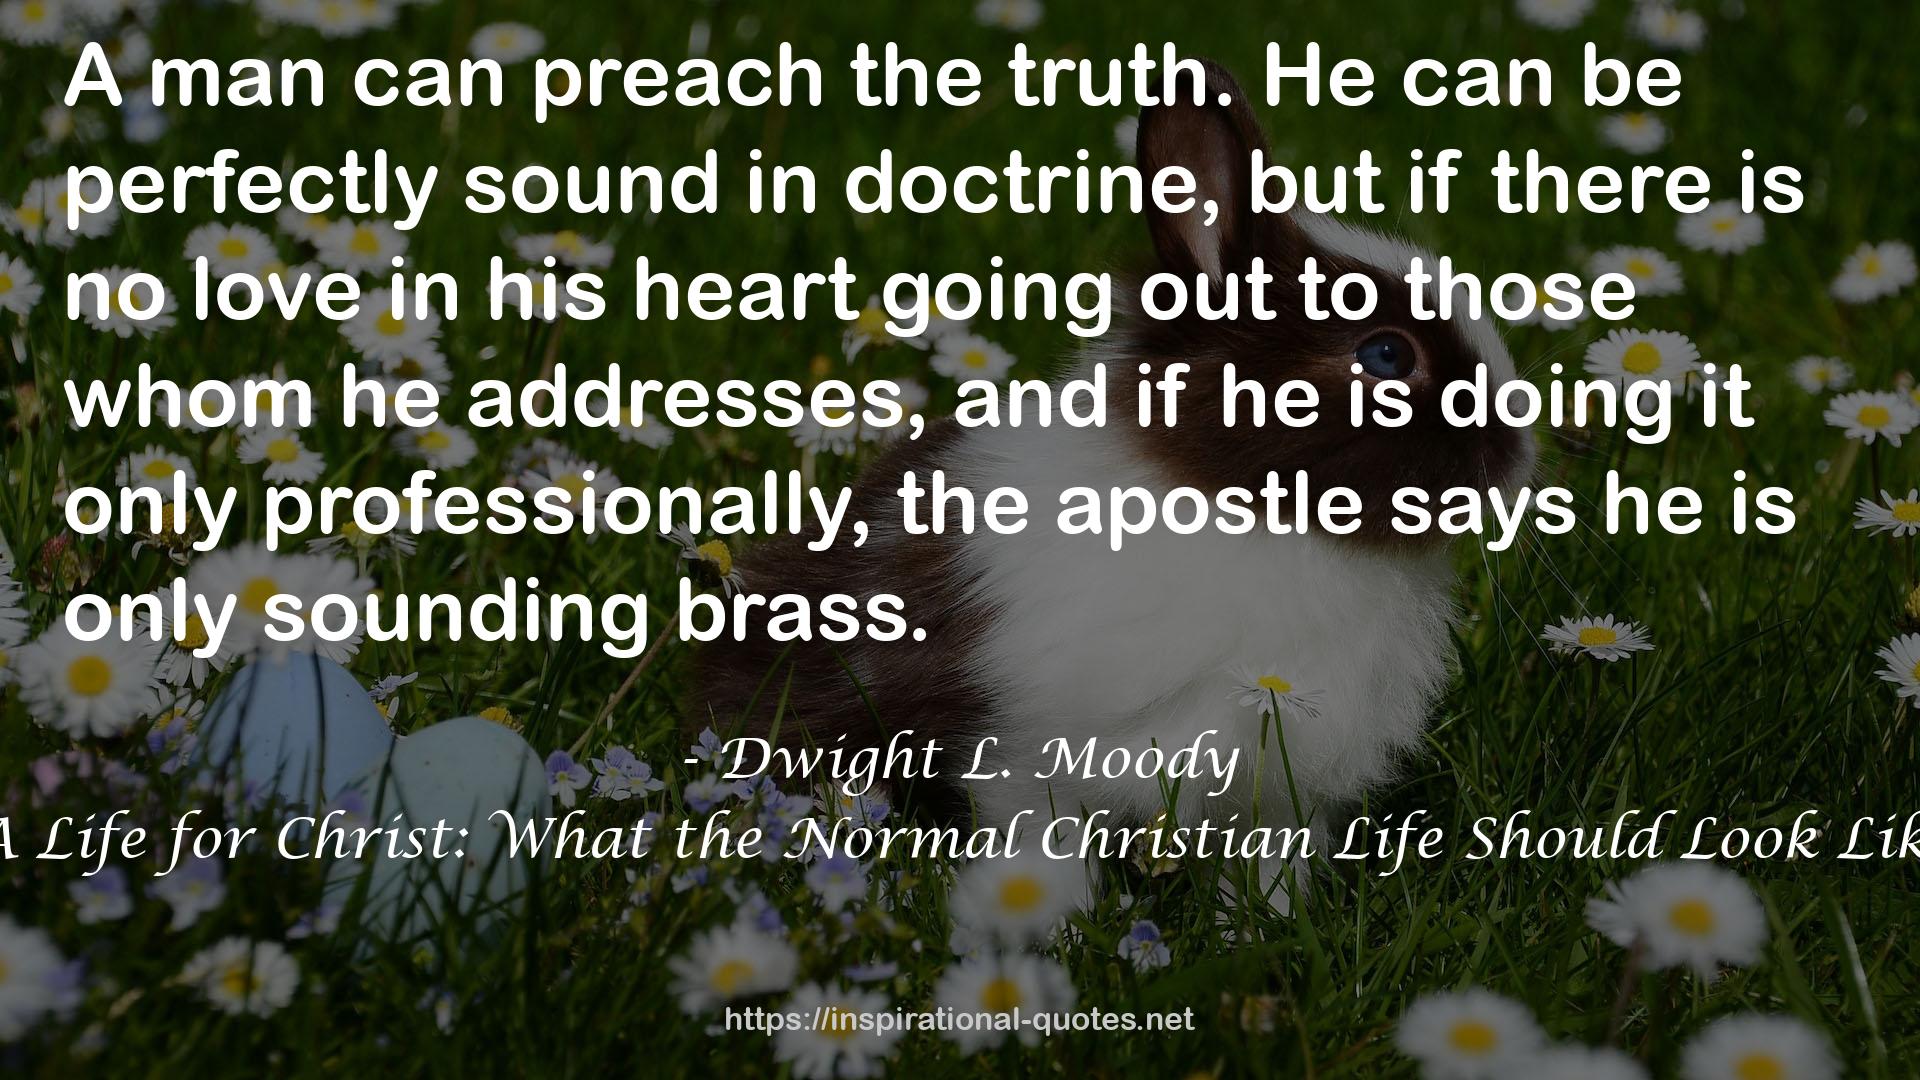 A Life for Christ: What the Normal Christian Life Should Look Like QUOTES